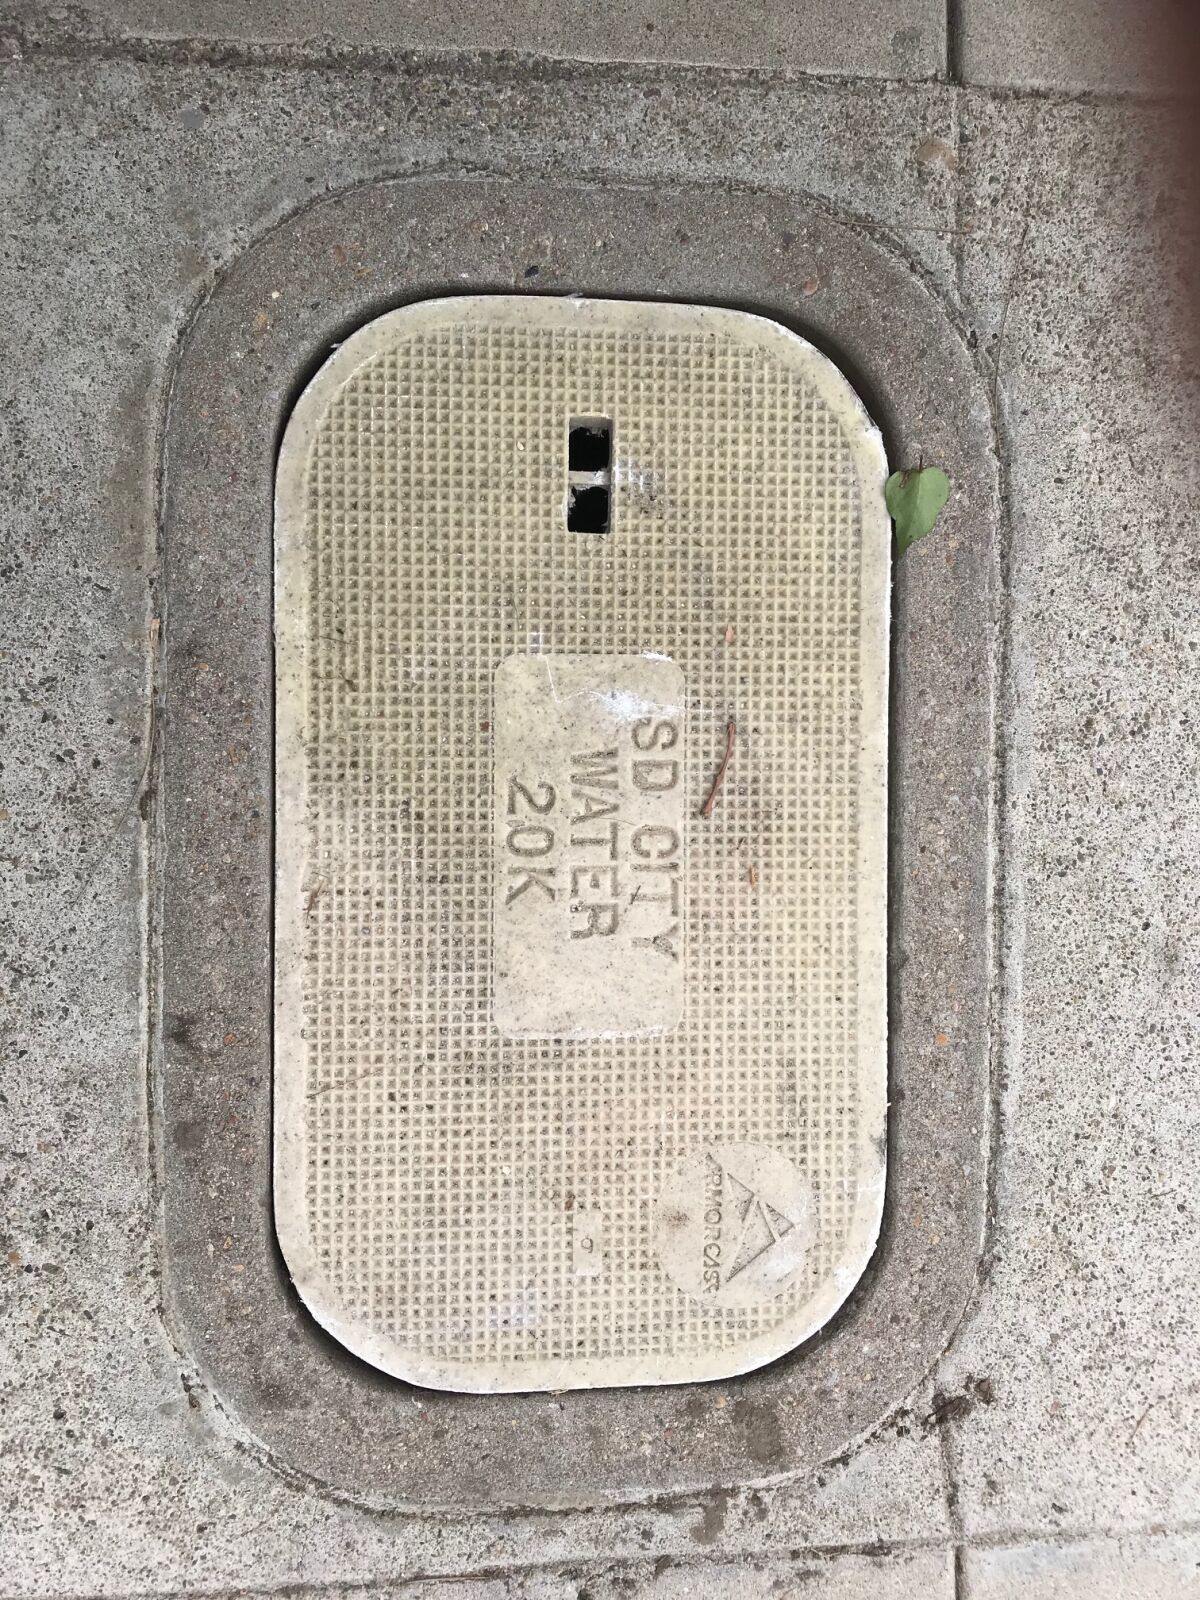 Inga has a new water meter cover after reporting the old deteriorating one on the city of San Diego's Get It Done app.